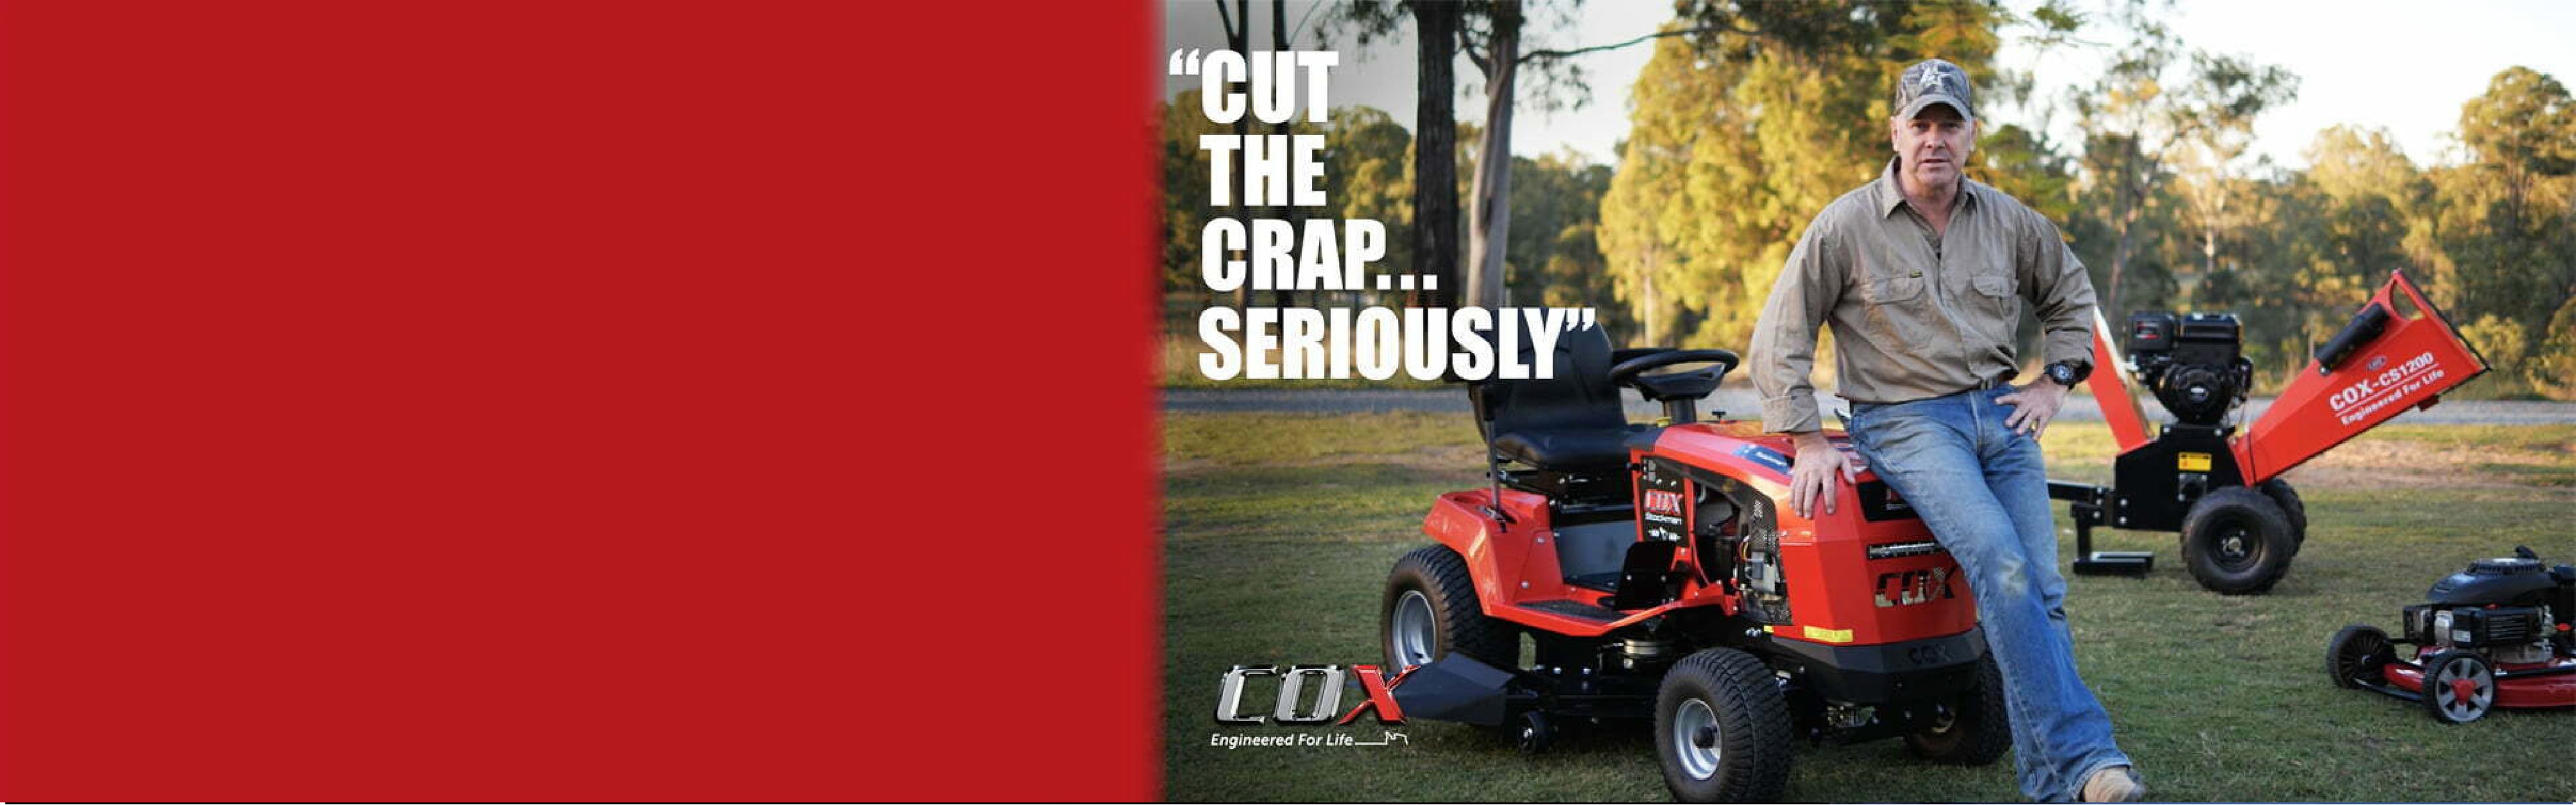 COX Mowers Cut_the_crap_seriously graphic with Mark Larkham sitting on a Cox Ride-On Mower with a Vertical Chipper in the background